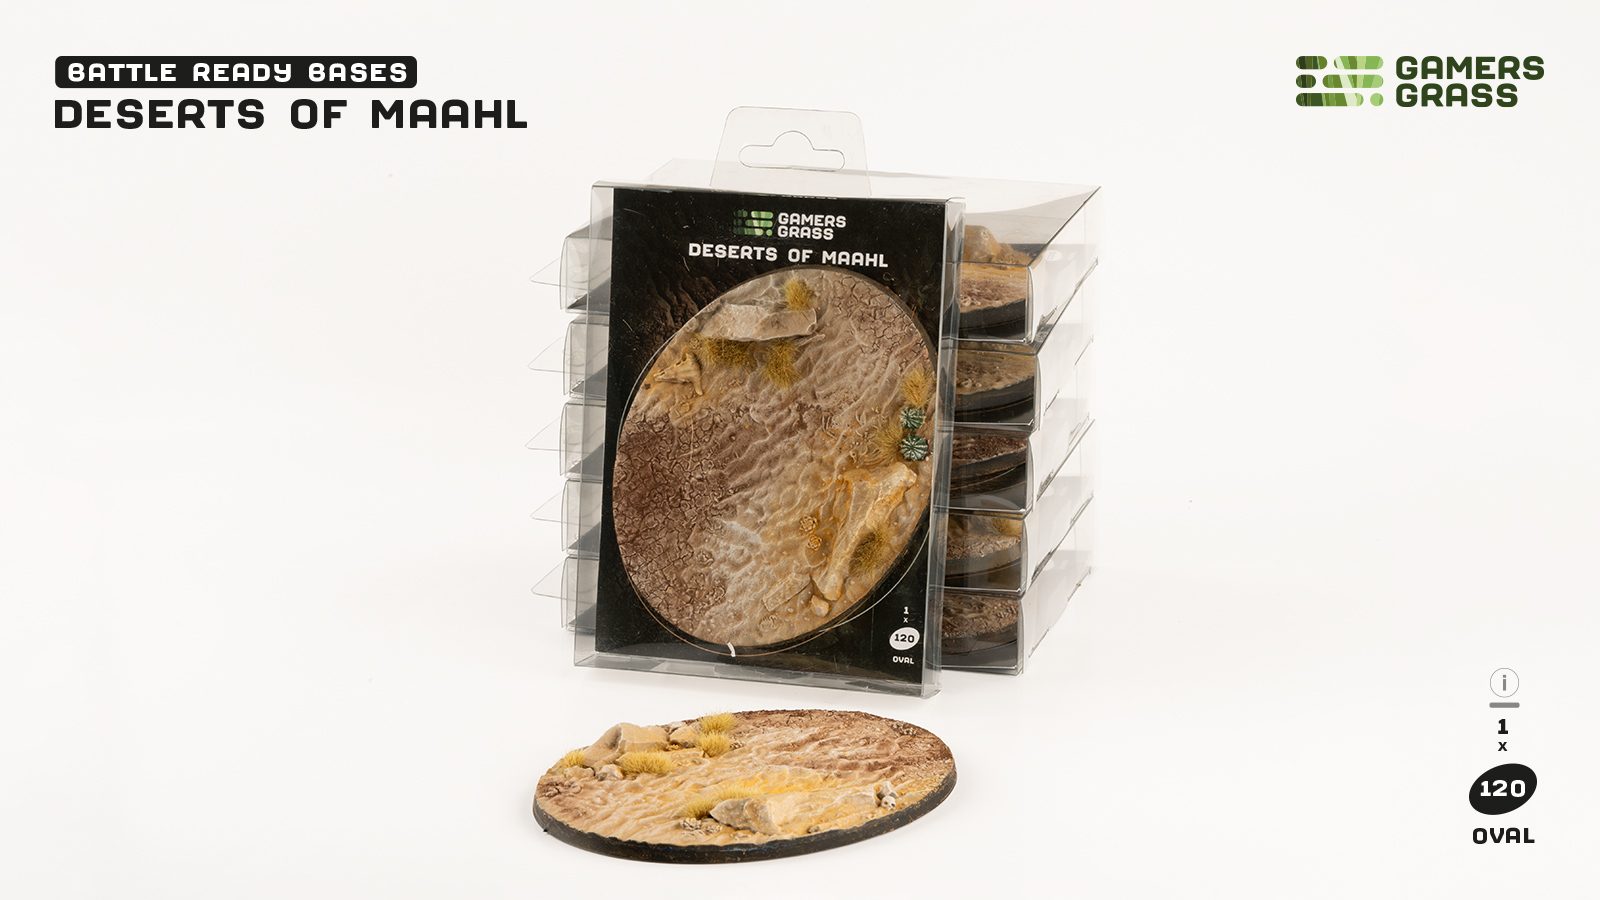 Battle Ready Bases: Deserts of Maahl Oval 120mm (x1) 